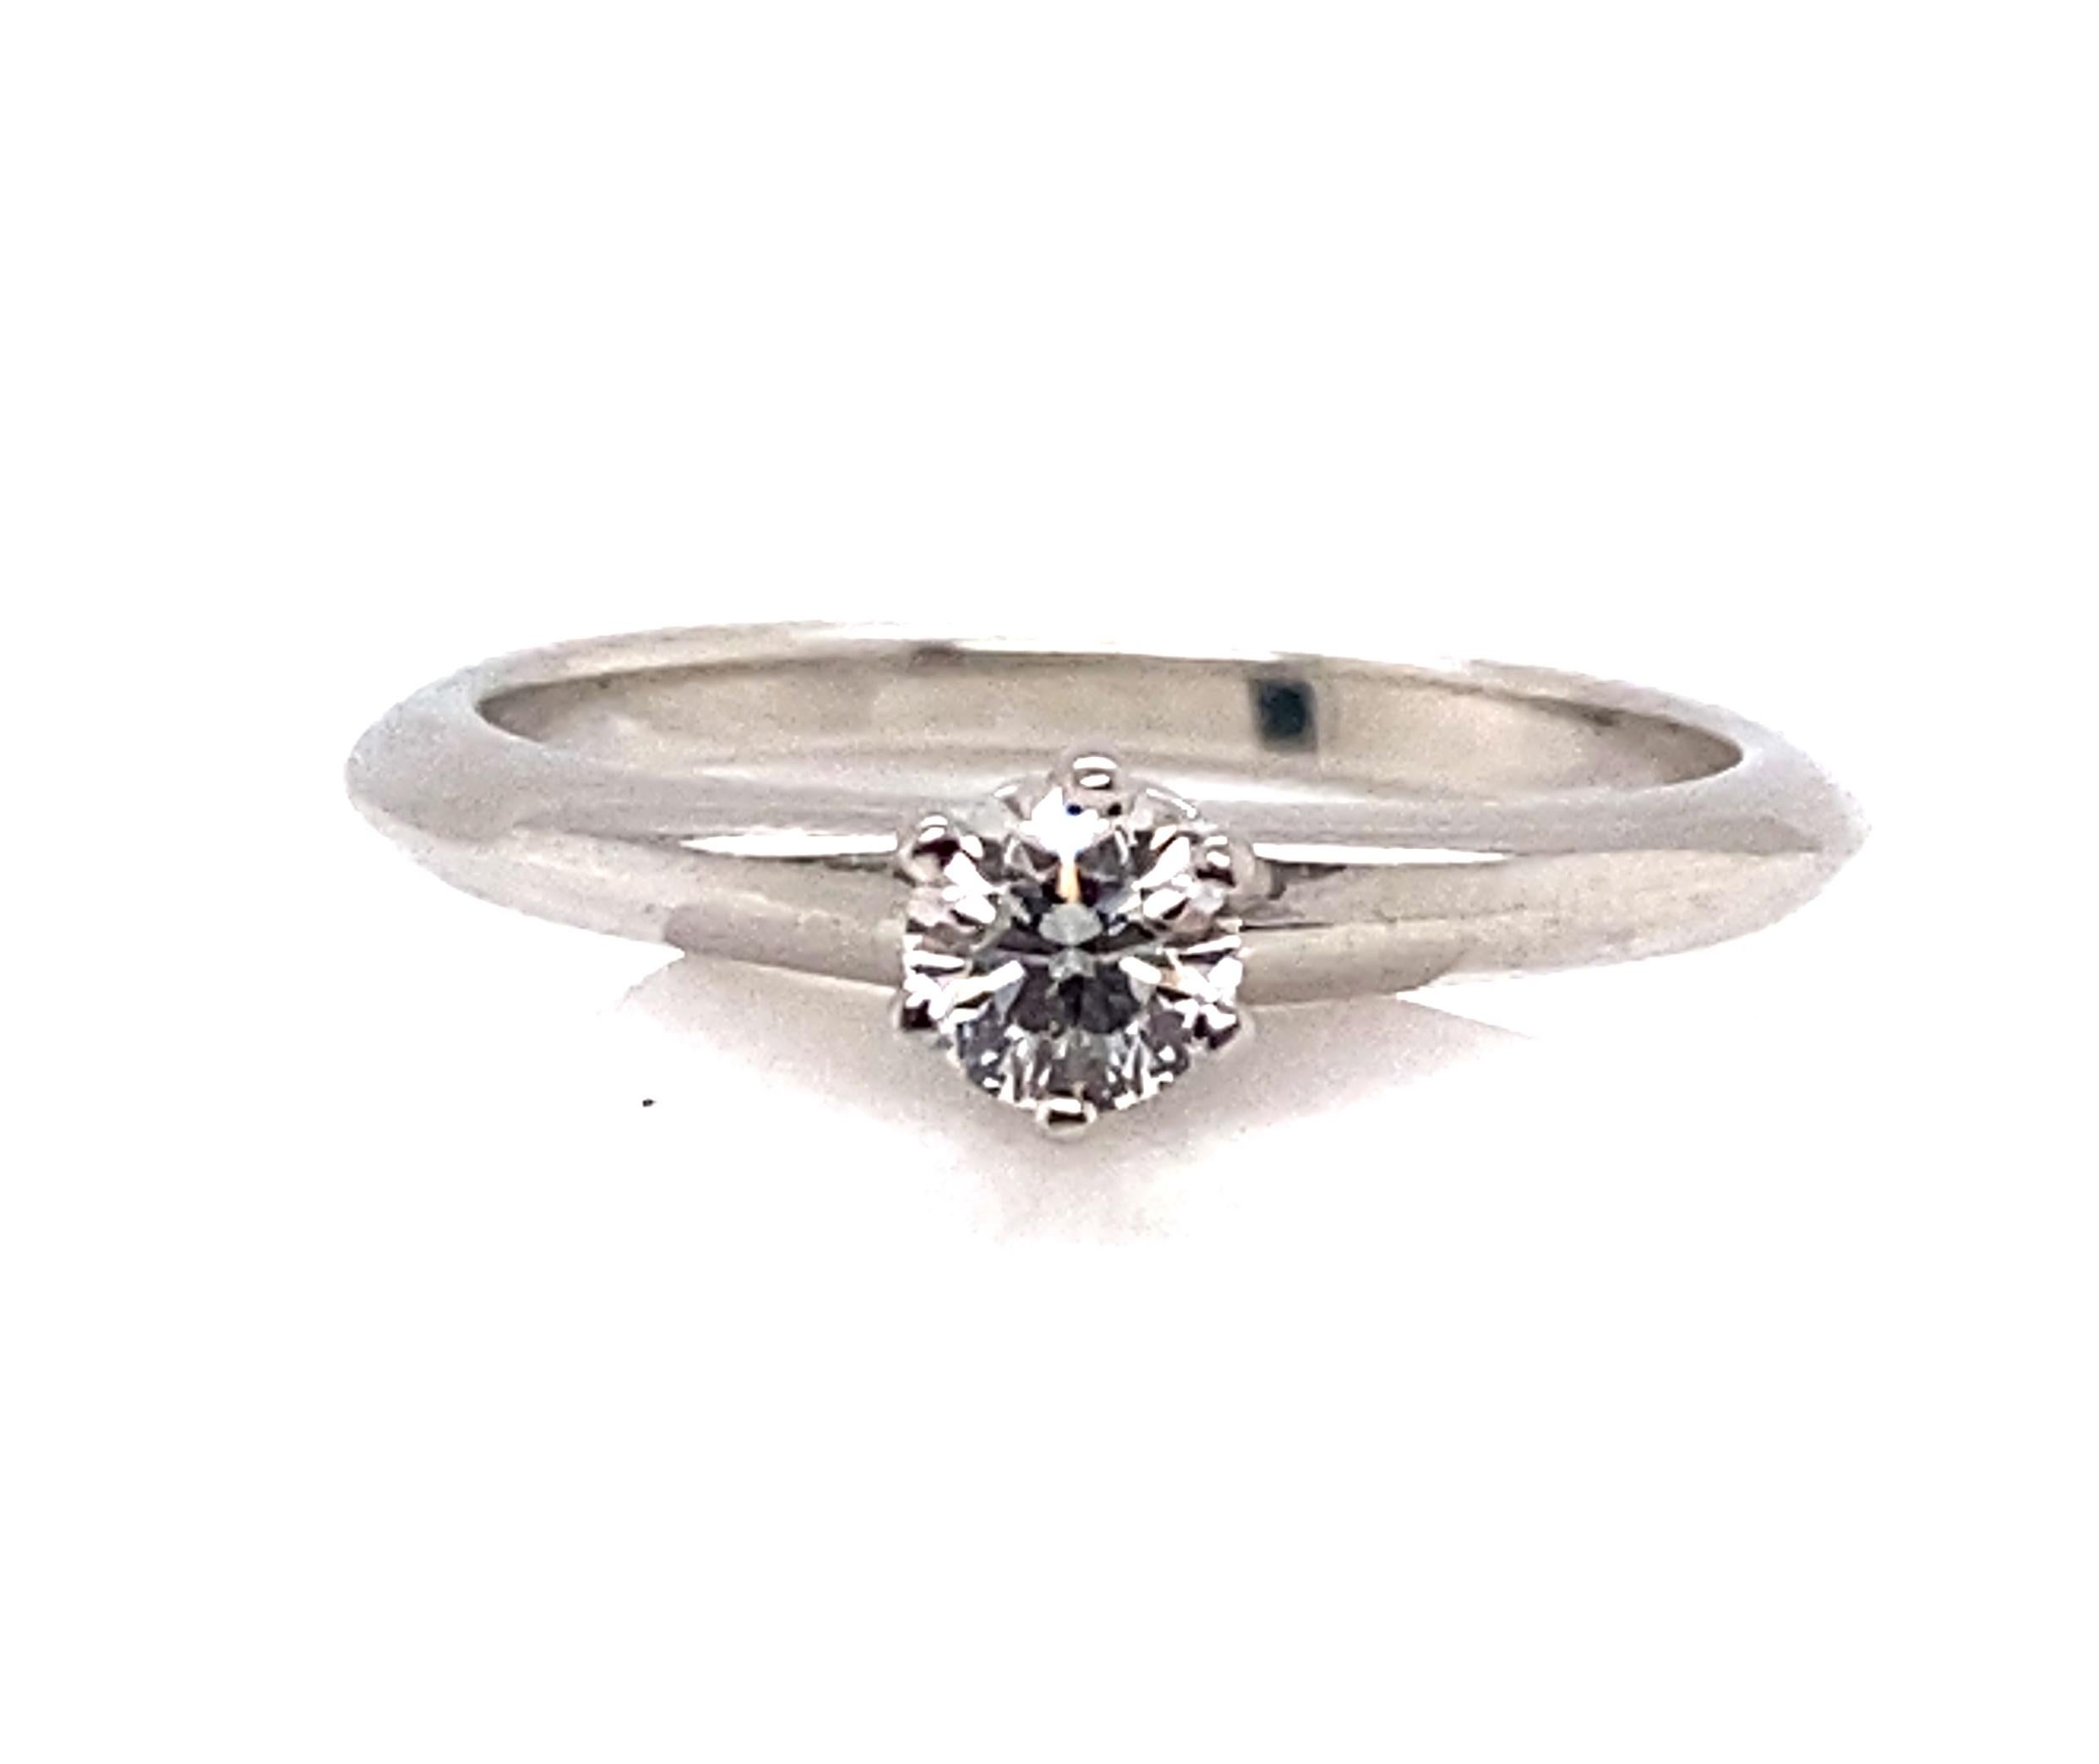 Tiffany & Co Engagement Ring .20ct G-VS1  Diamond Solitaire Platinum


Featuring a SUPERB Tiffany .20ct G-VS1 Natural Diamond Center

MSRP $1,780.00 Tiffany Retail 

The Best Of The Best Tiffany Platinum Engagement Ring

G-VS1 Solitaire